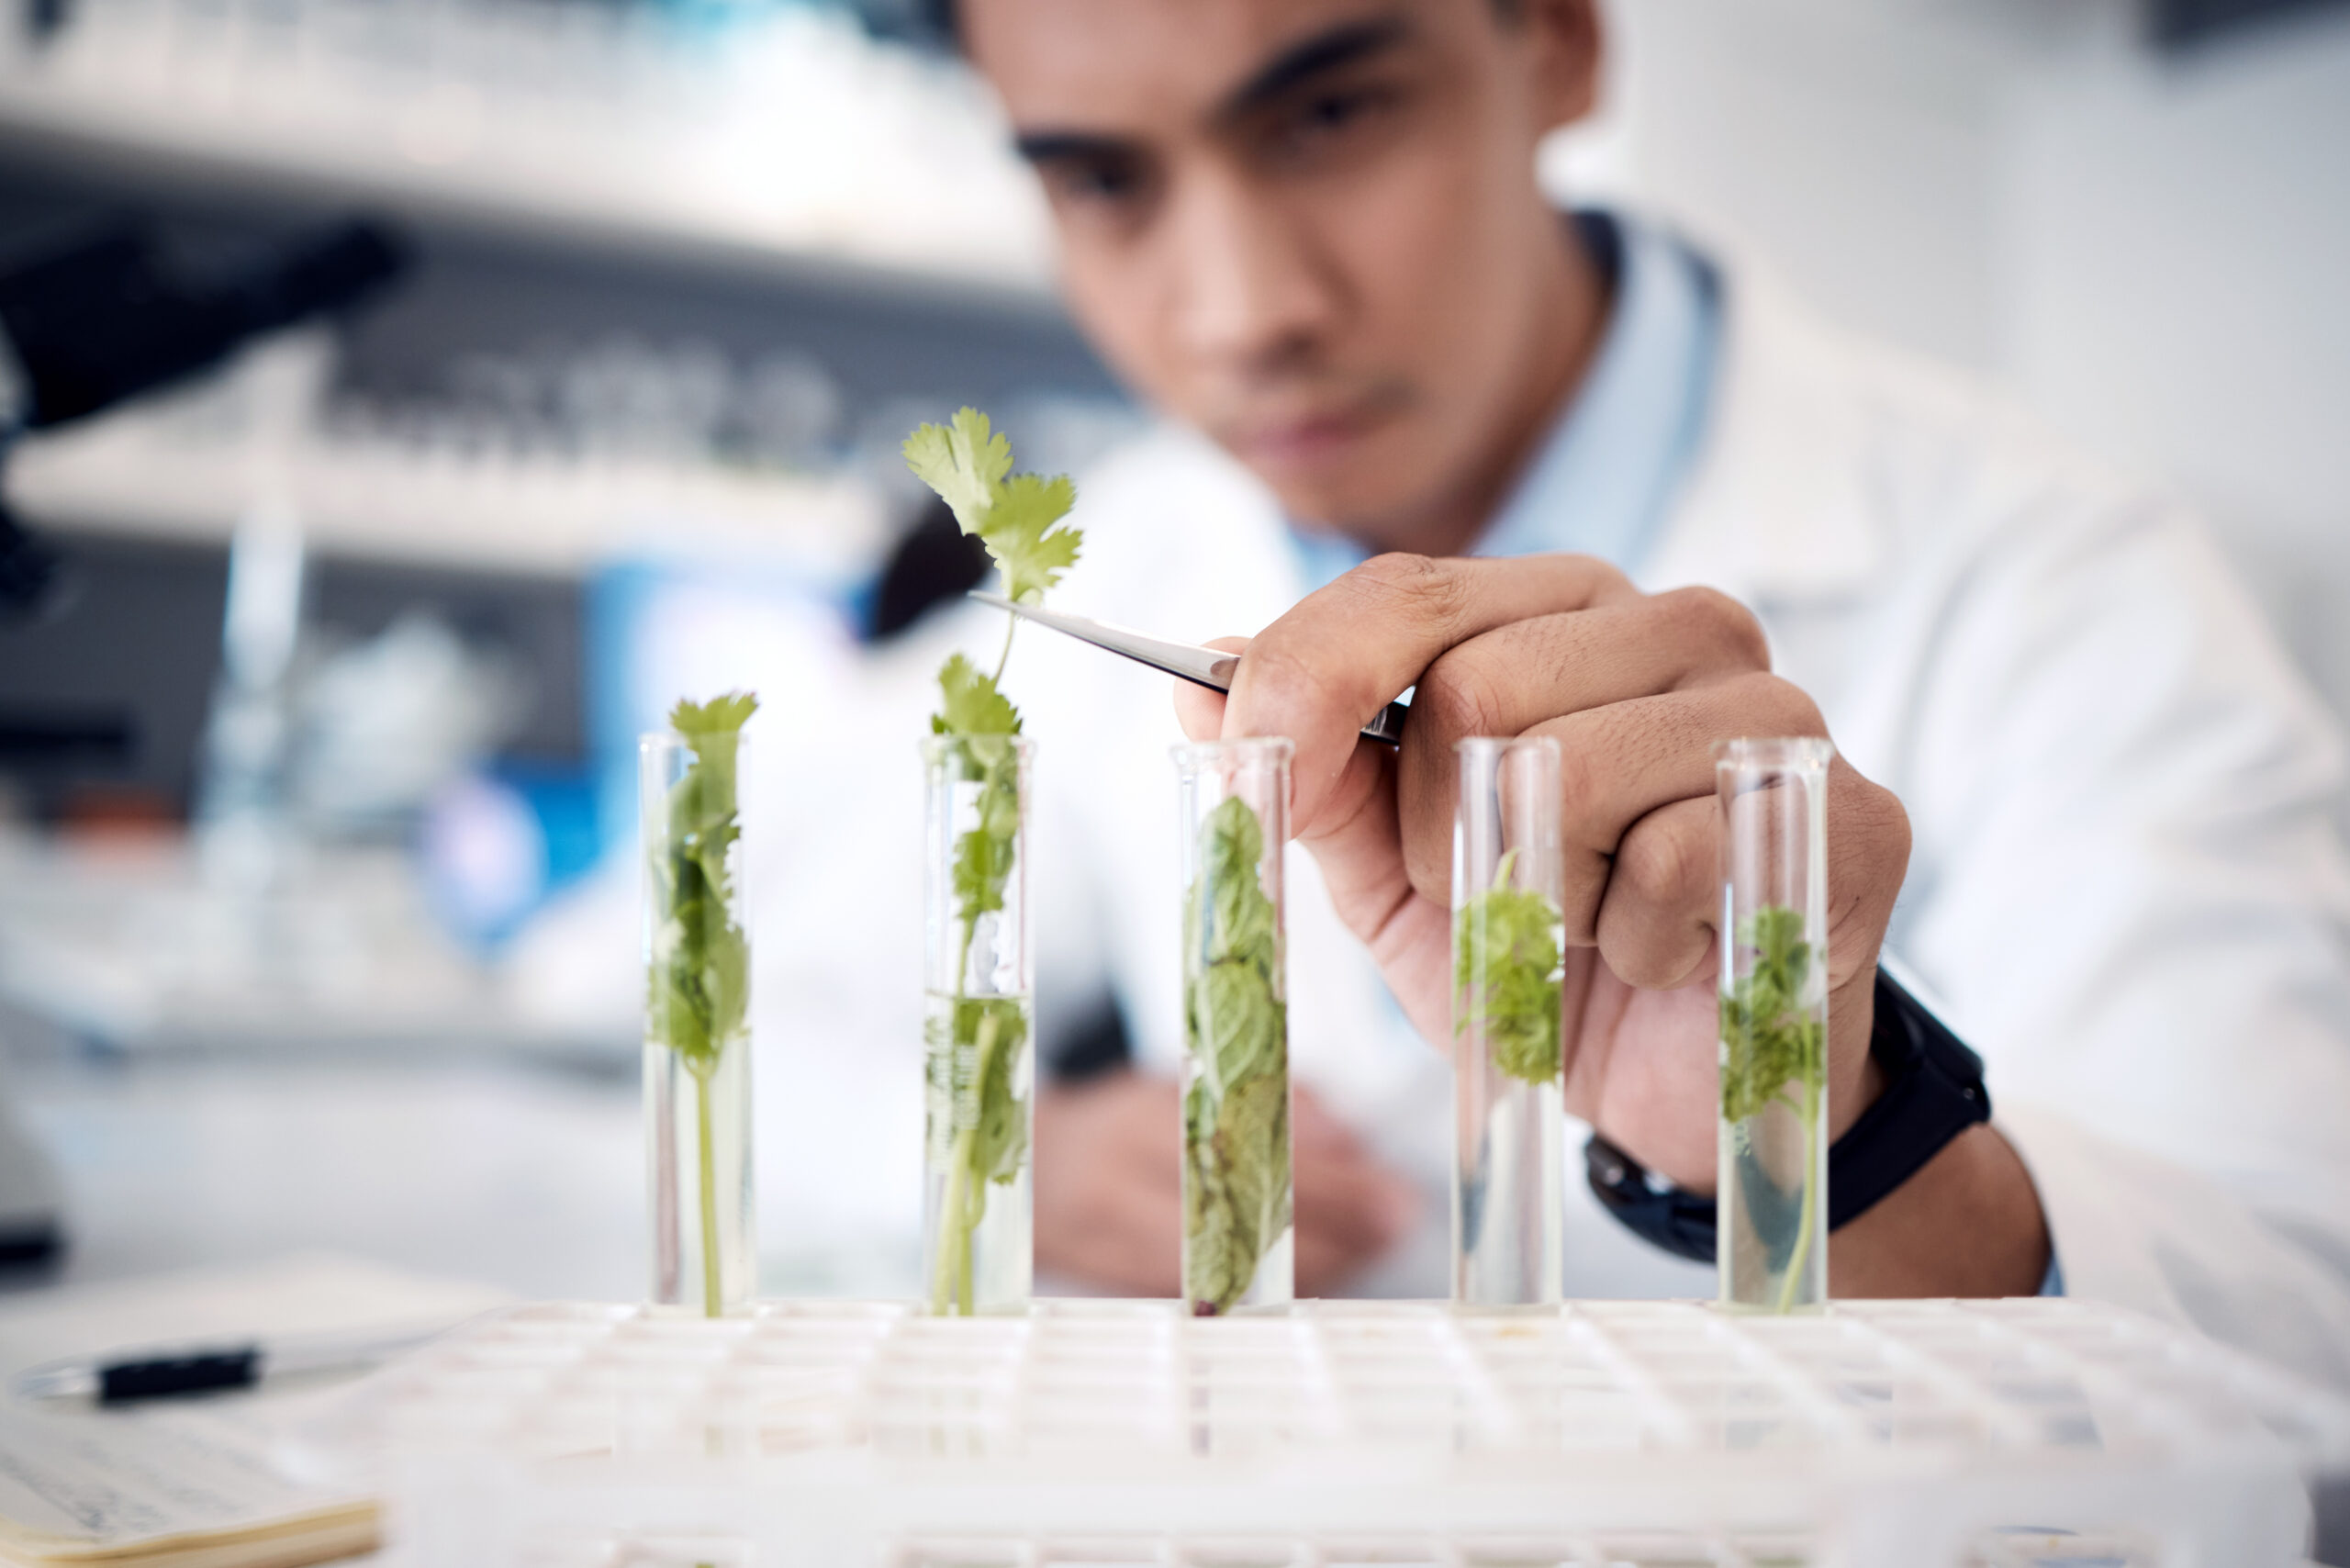 Hands-plant-scientist-and-laboratory-test-tubes in plant growth research, climate change solution.